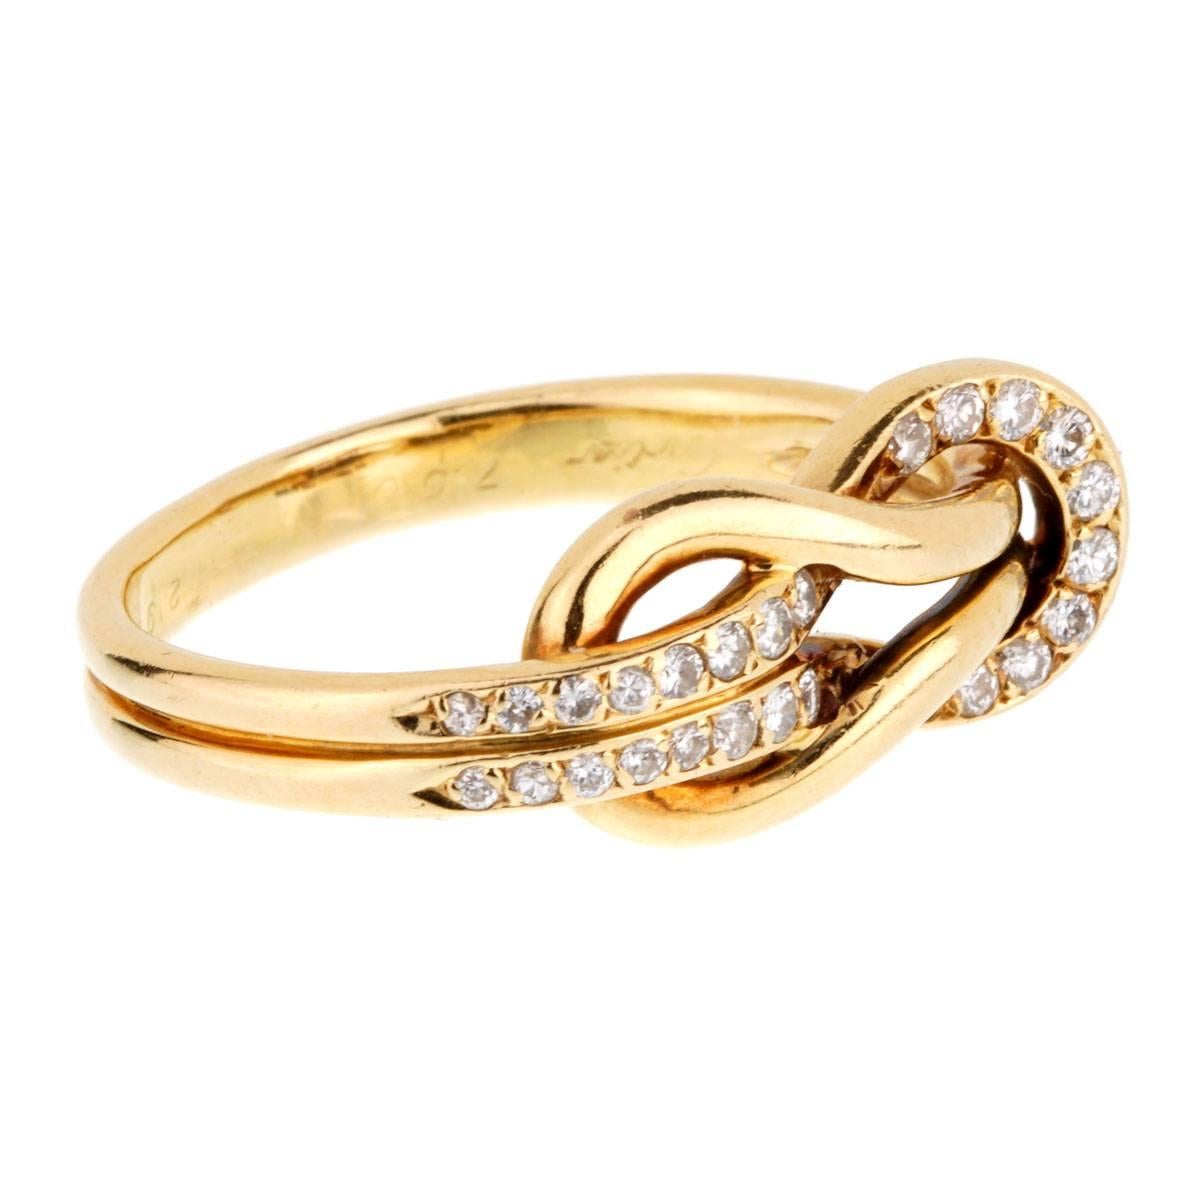 A rare Cartier love knot ring featuring round brilliant cut diamonds set in 18k yellow gold.

Size 6